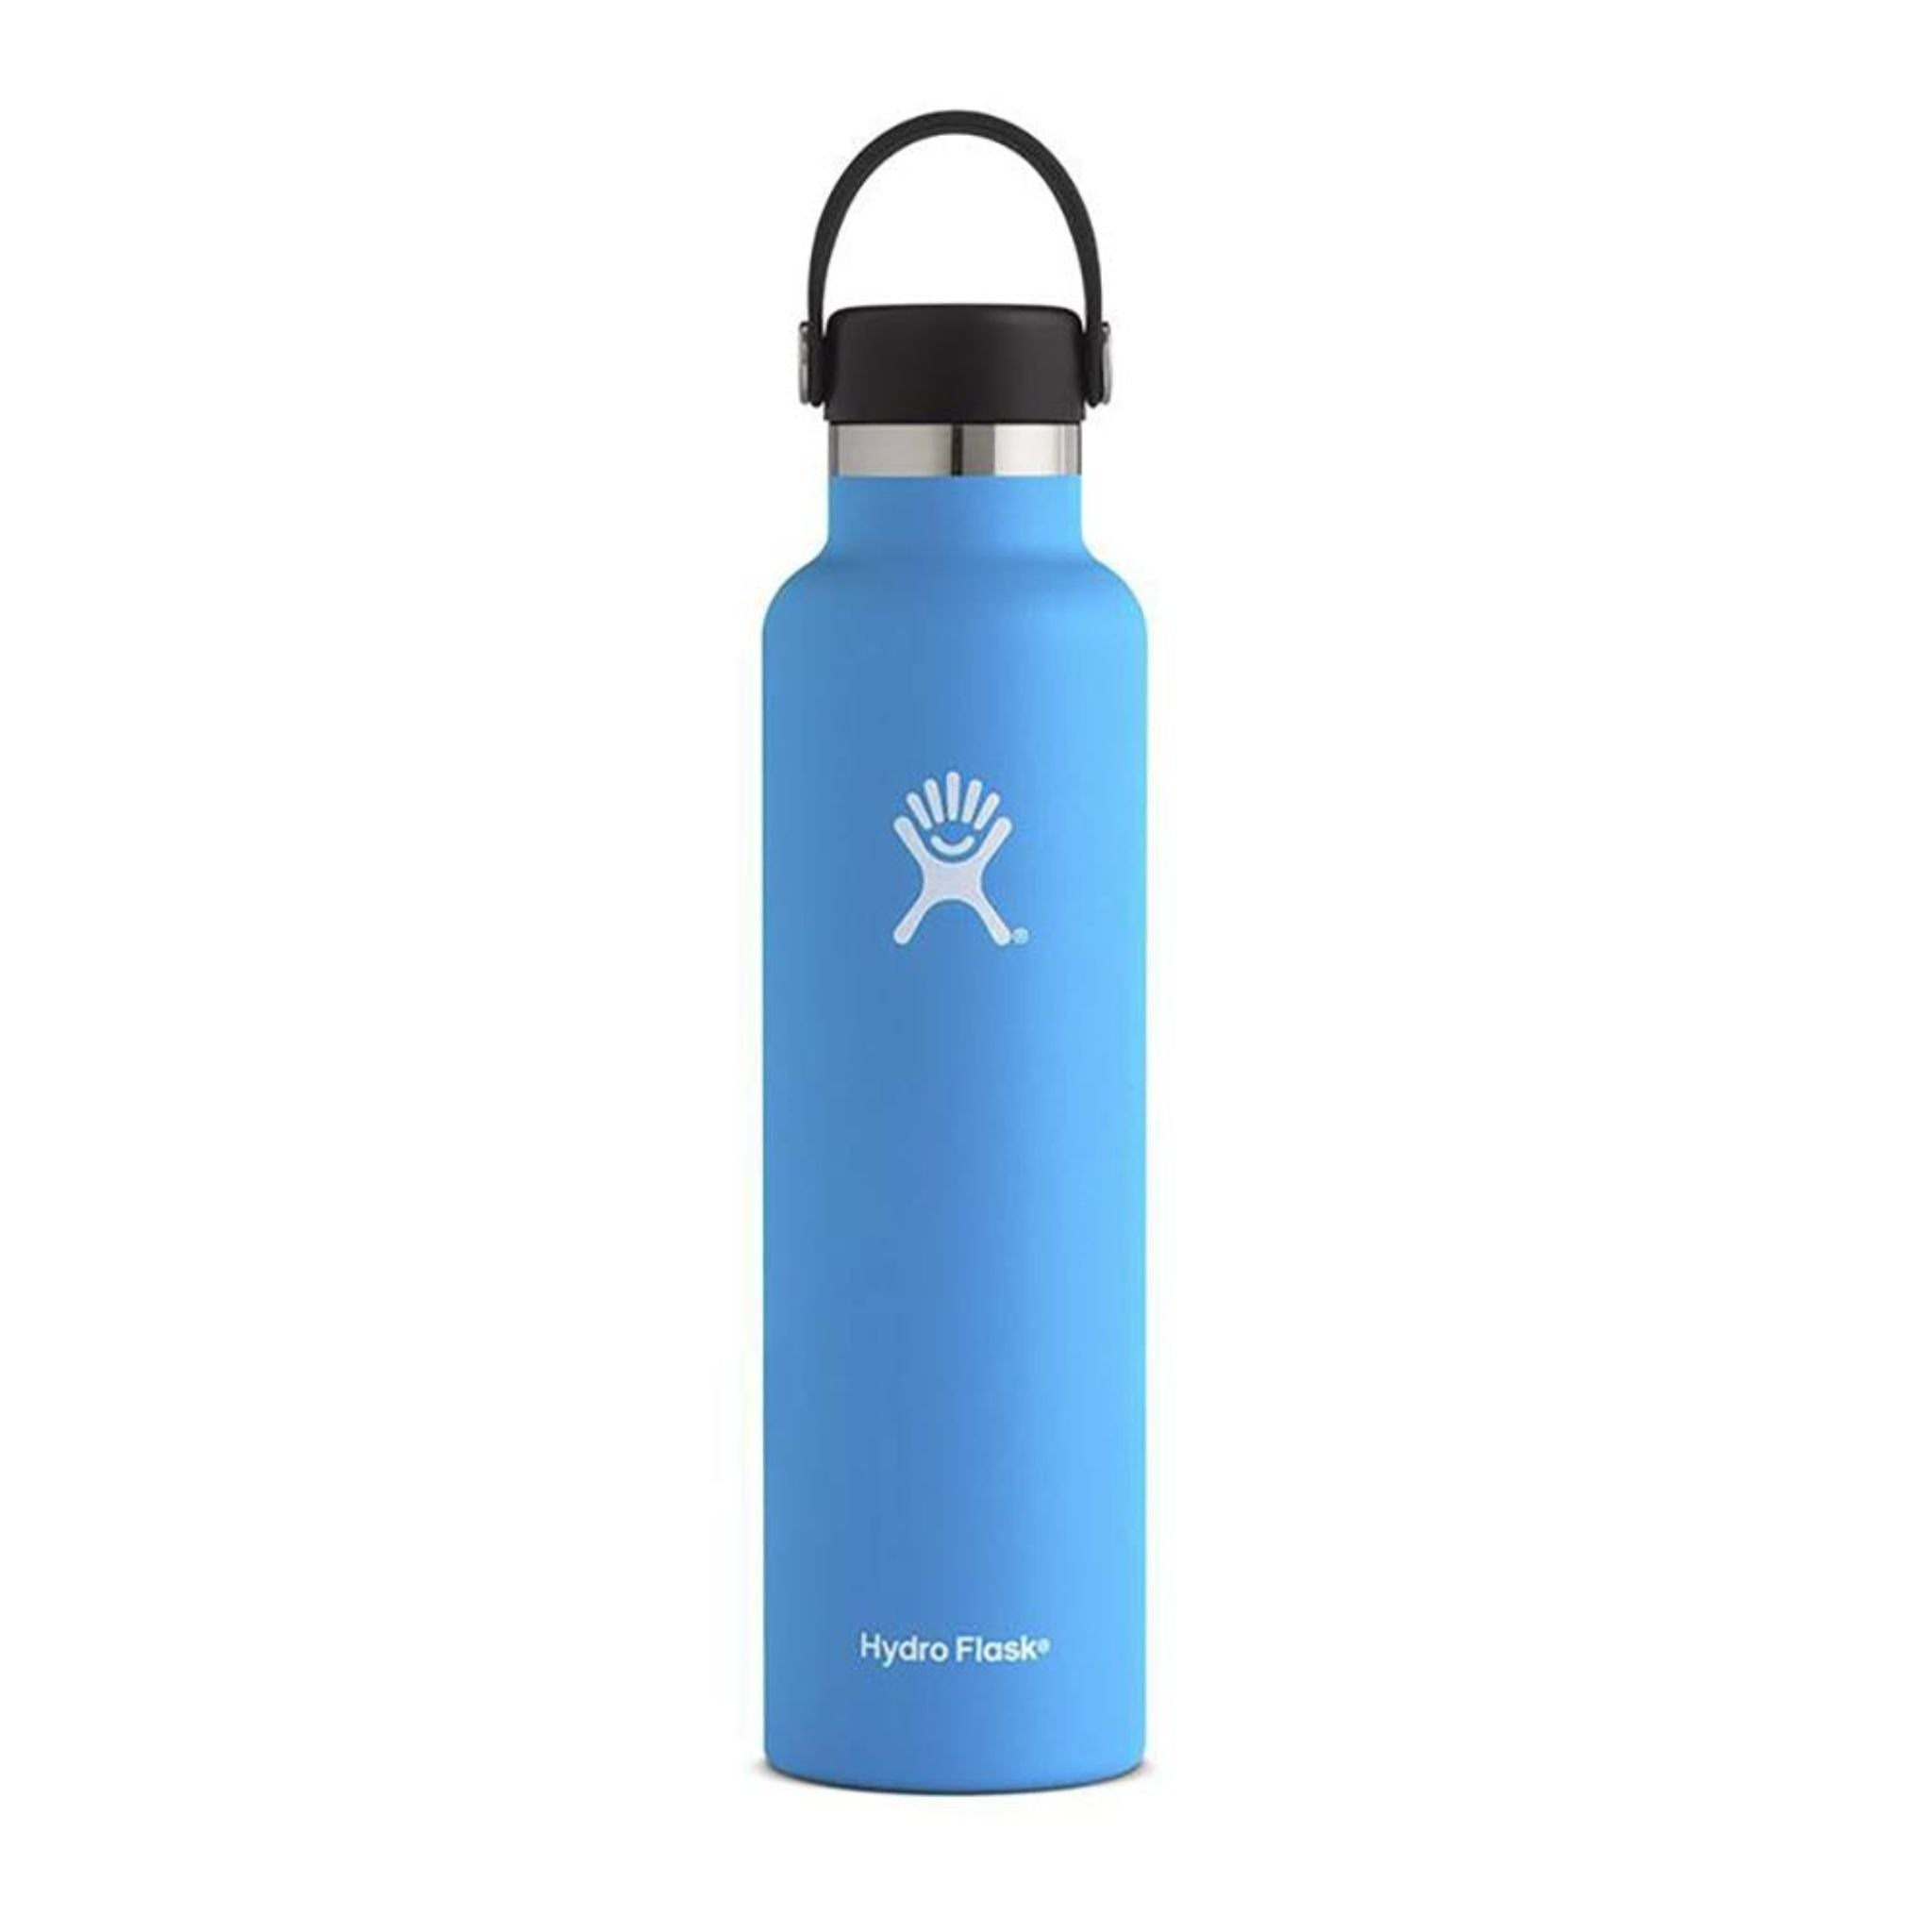 Hydro Flask 24oz (709ml) Standard Mouth with Flex Cap - Pacific